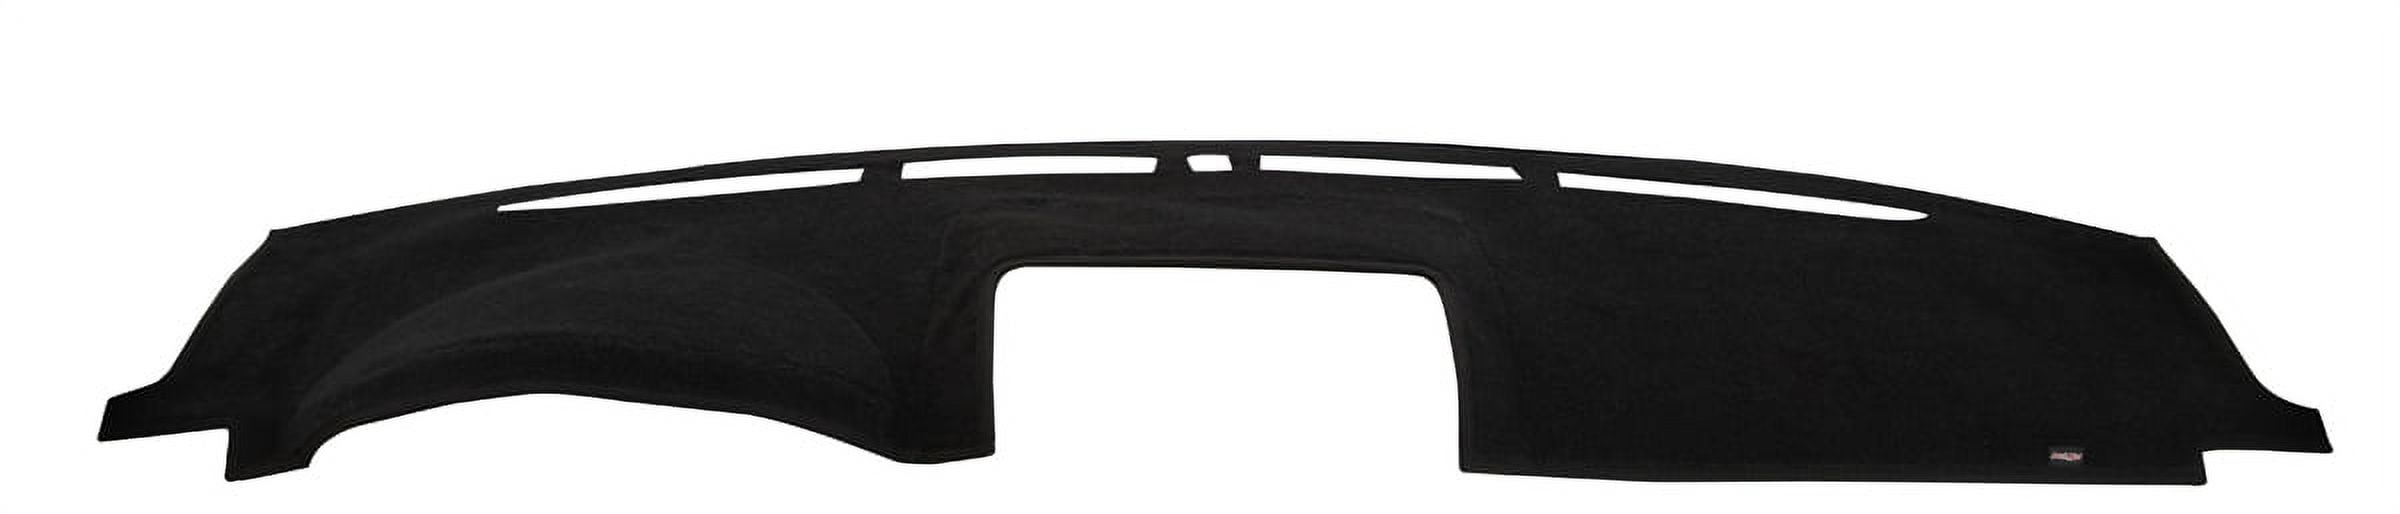 Covercraft DashMat Custom Dash Cover for 1997-2002 Ford Expedition,  1997-2003 F-150, 2004 F-150 Heritage, 1997-1999 F-250 0759-03-25 Black 